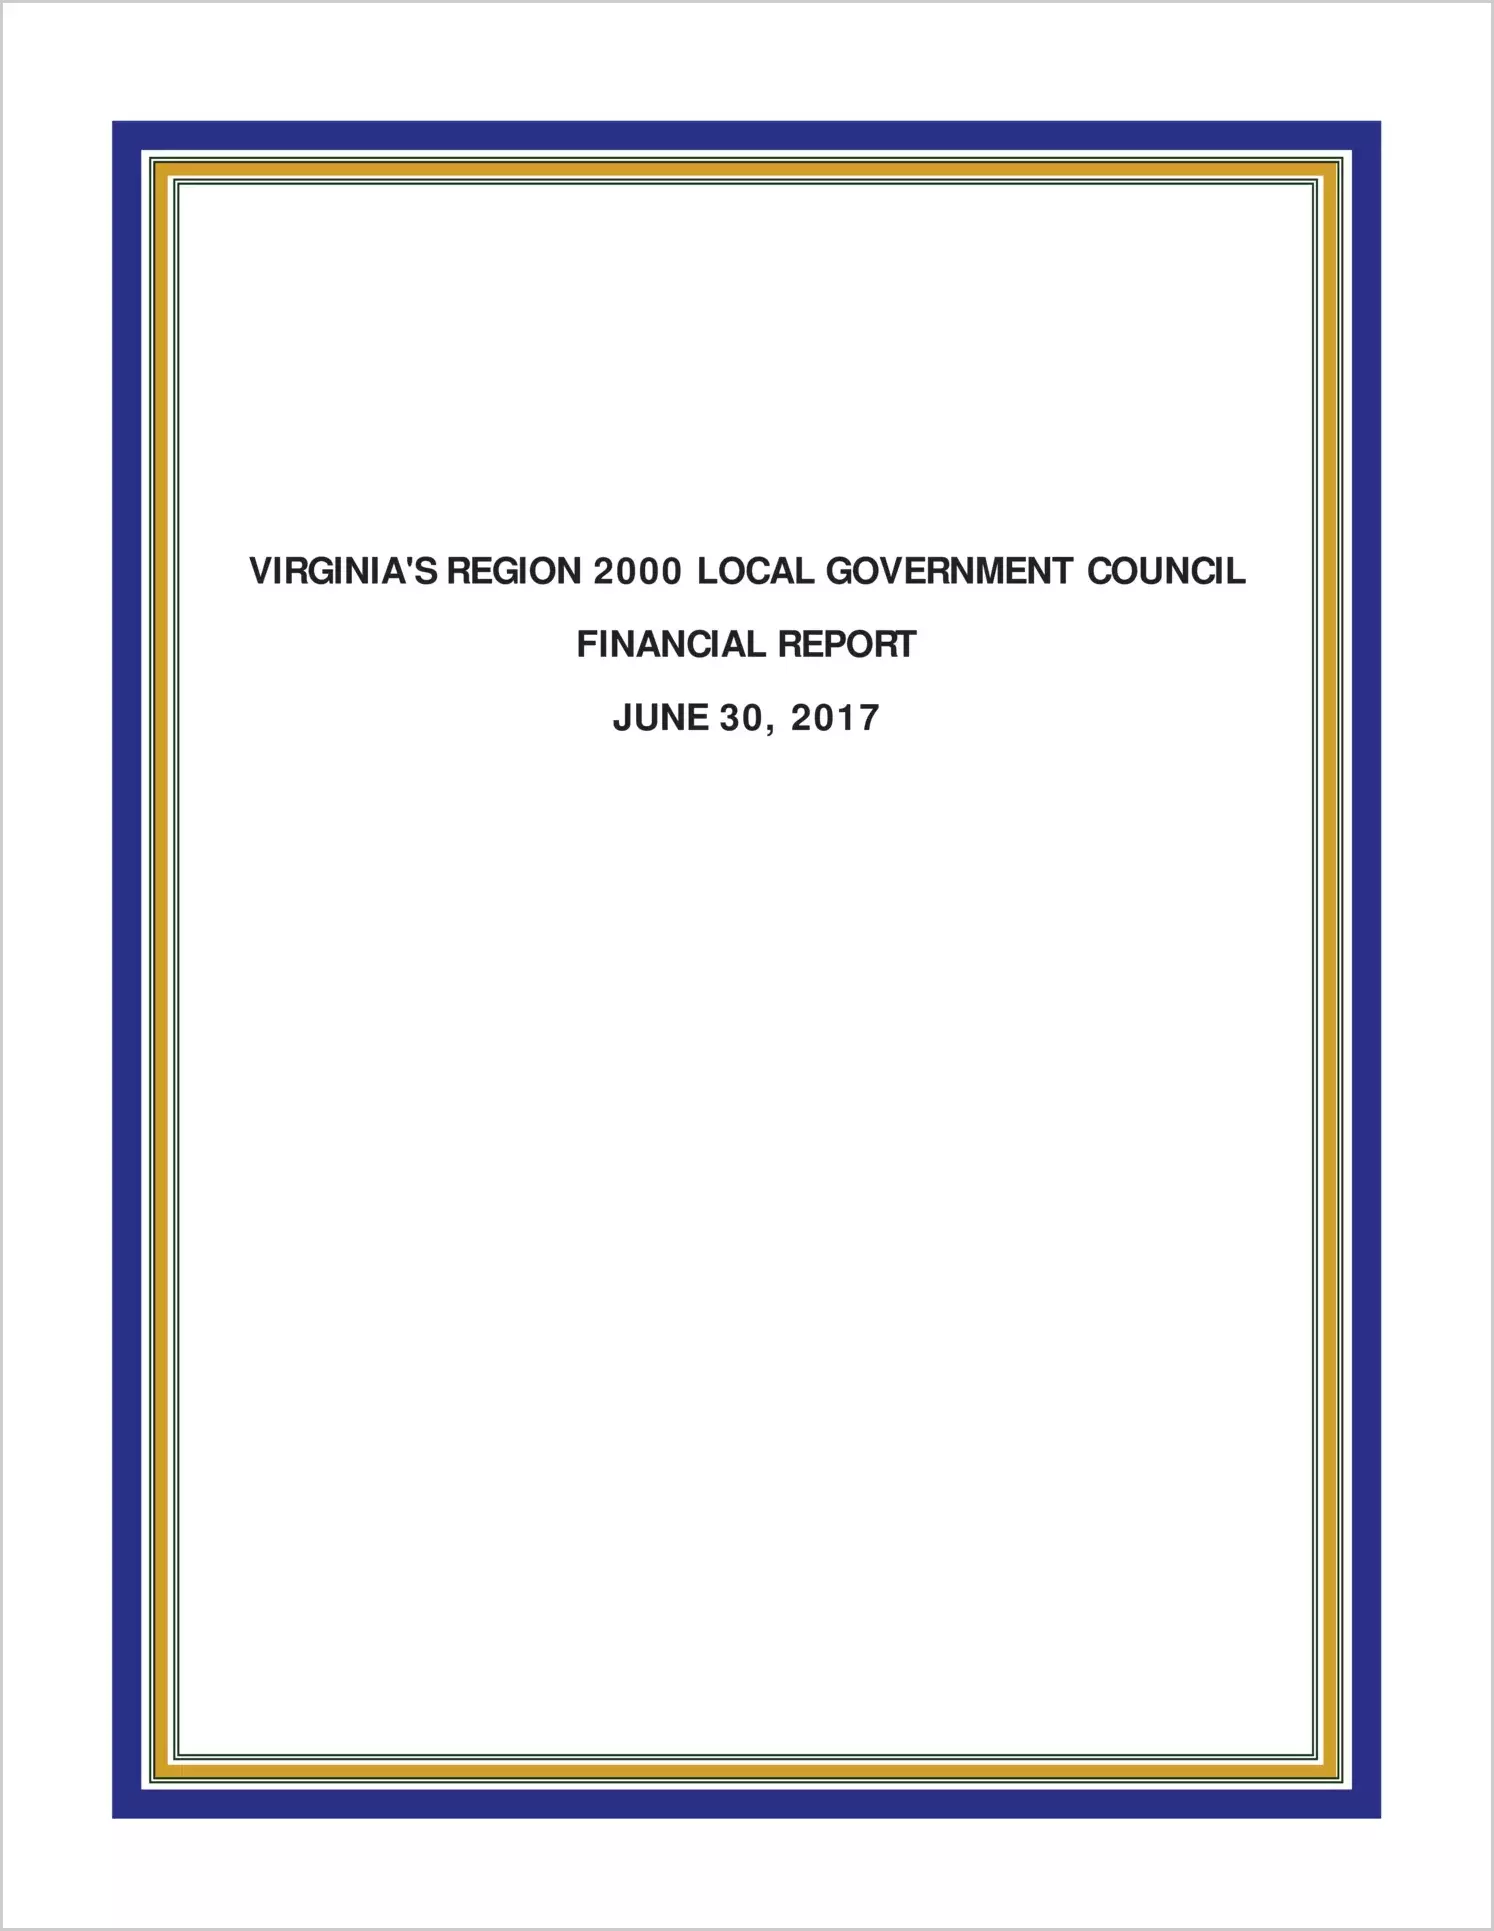 2017 ABC/Other Annual Financial Report  for Virginia's Region 2000 Local Government Council